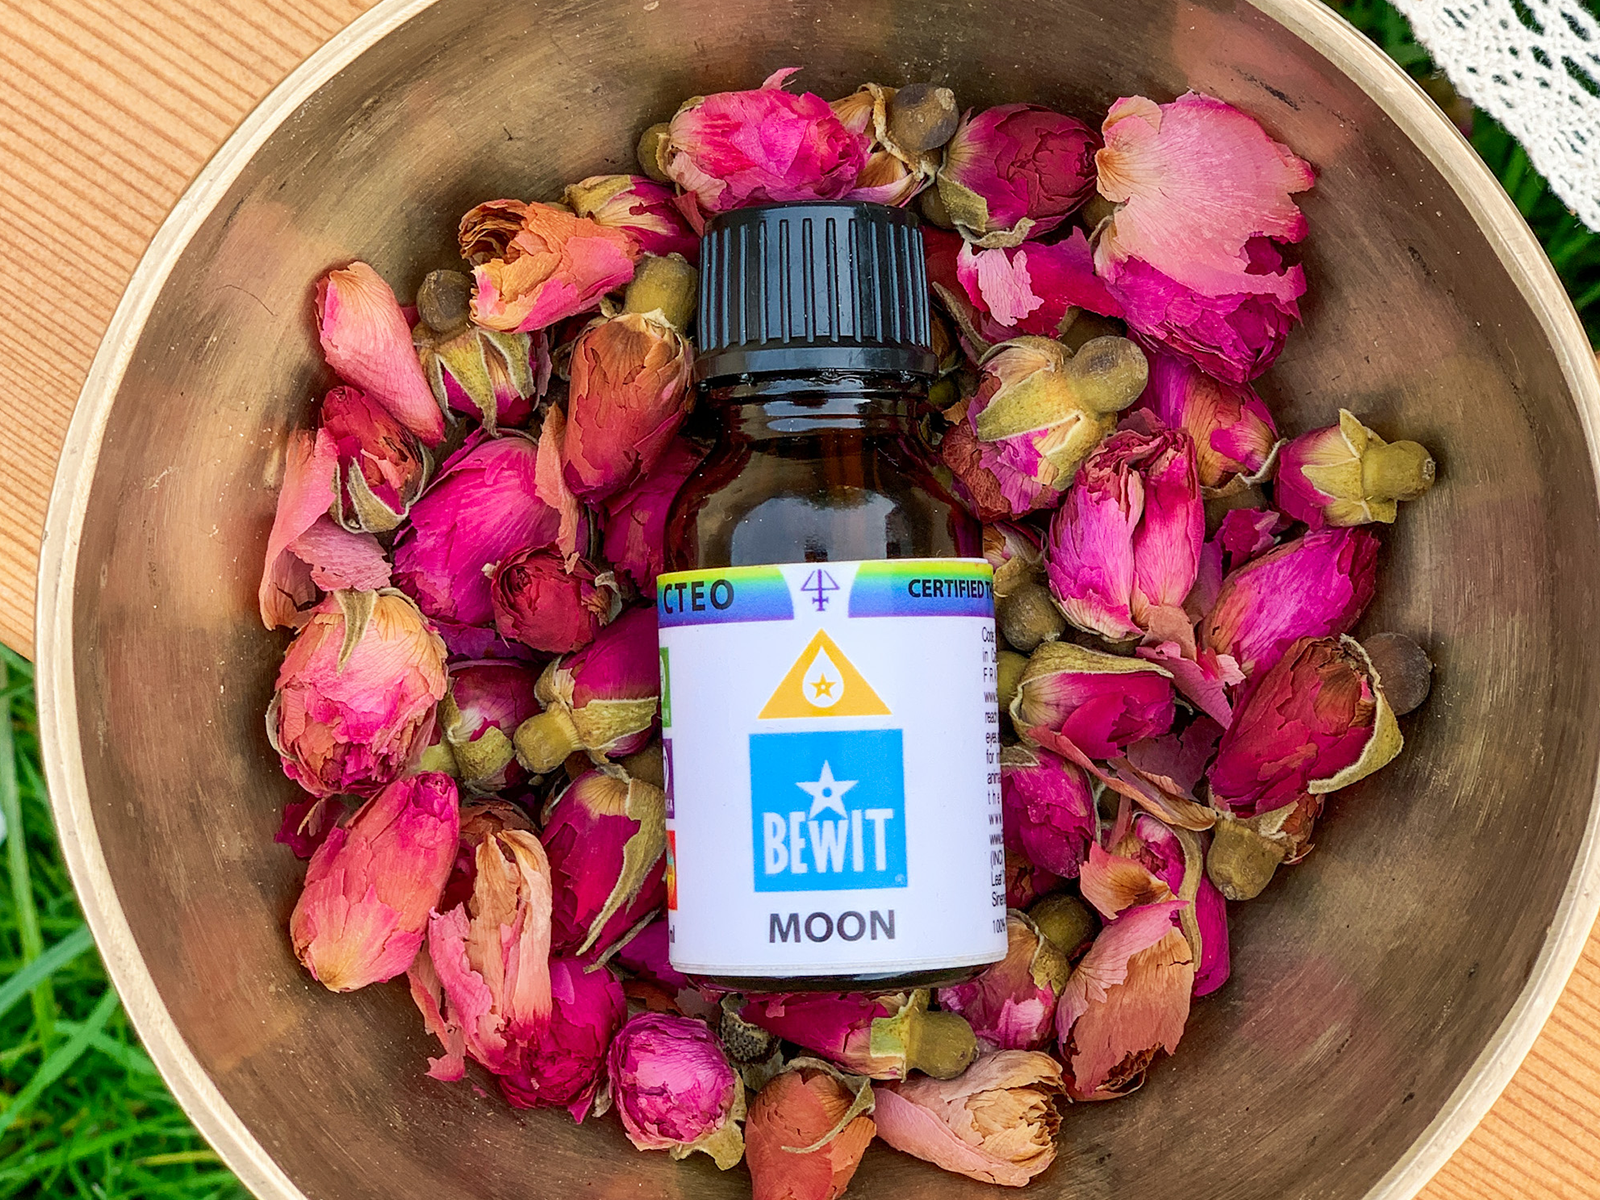 BEWIT MOON - A wonderful blend of the essential oils - 4